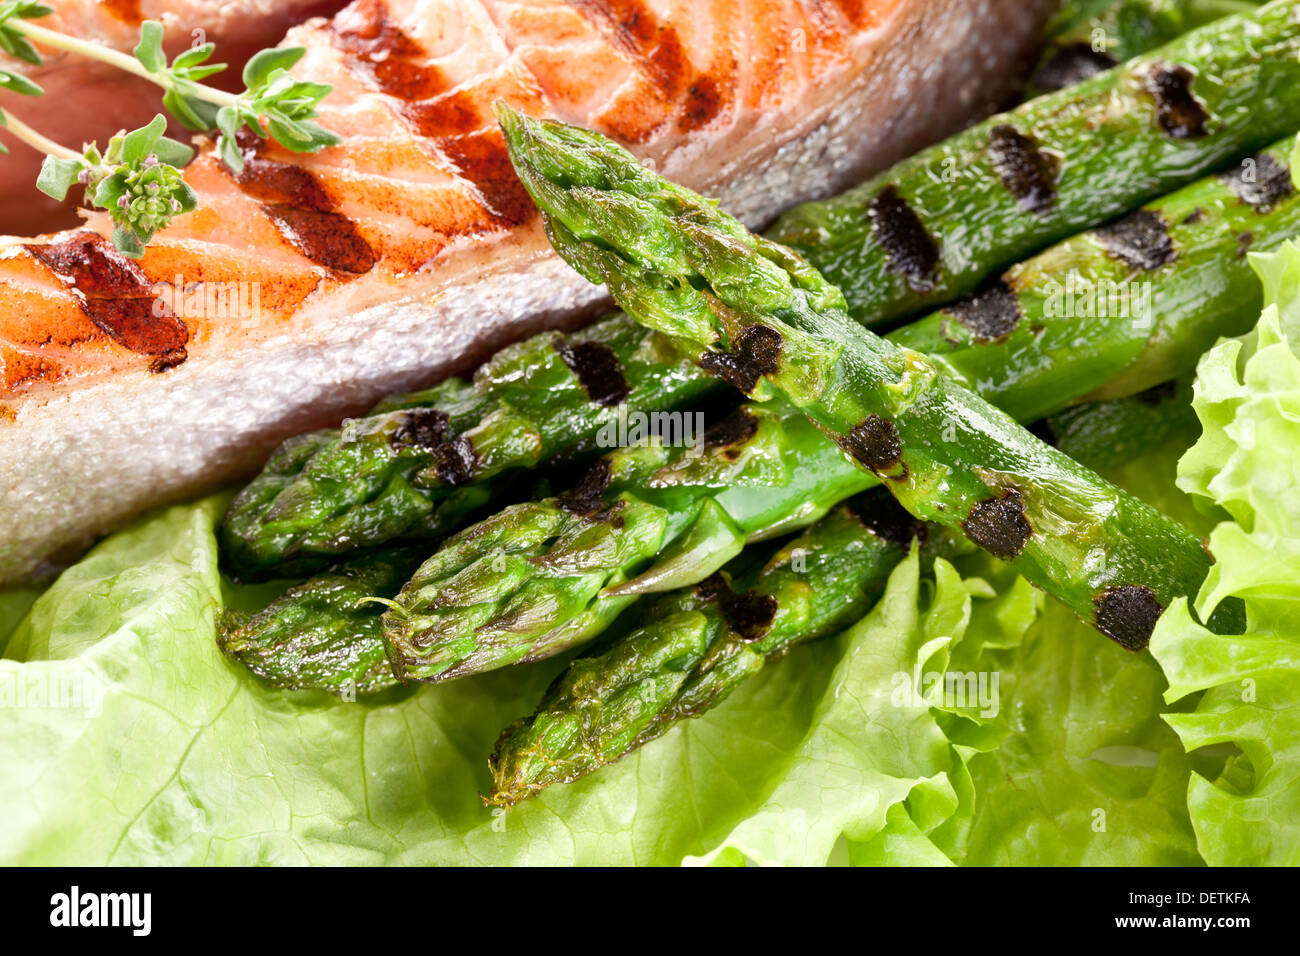 Grilled salmon and asparagus over lettuce leaves. Close up shot. Stock Photo